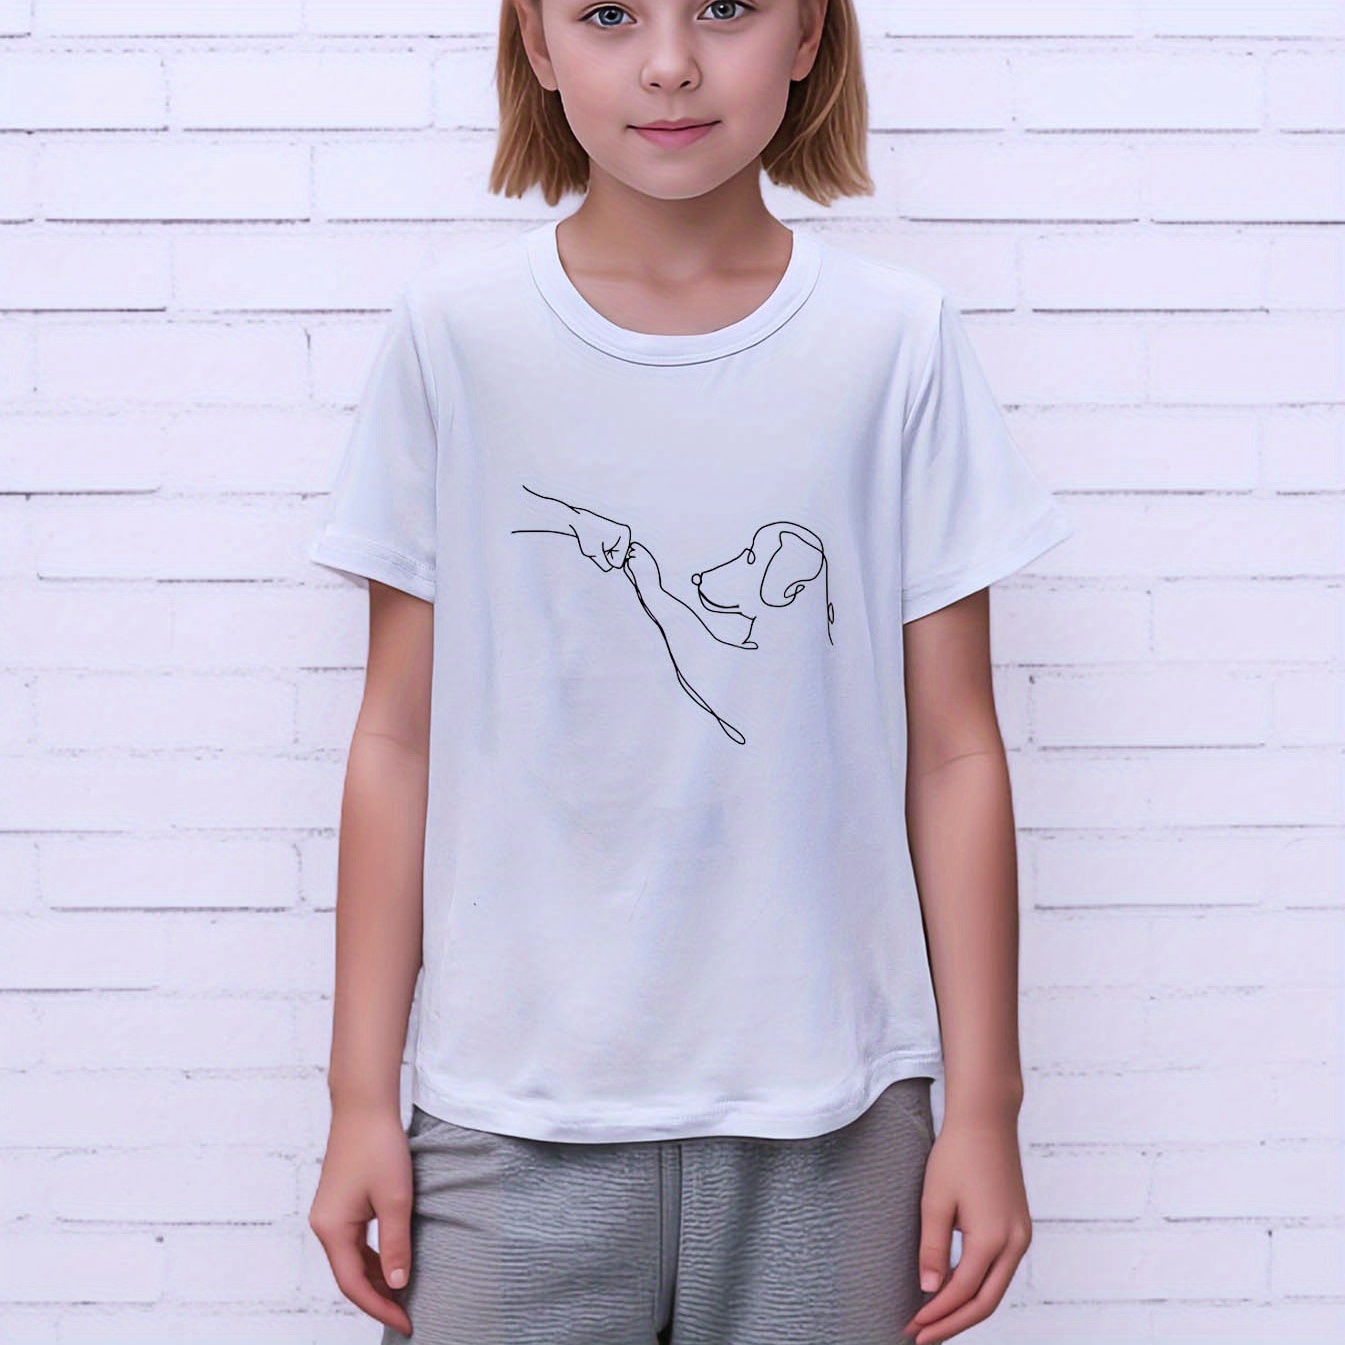 

Doodled Dog And Fist Graphic Print, Girls' Comfy & Loose T-shirts, Top Clothes For Spring & Summer For Outdoor Activities